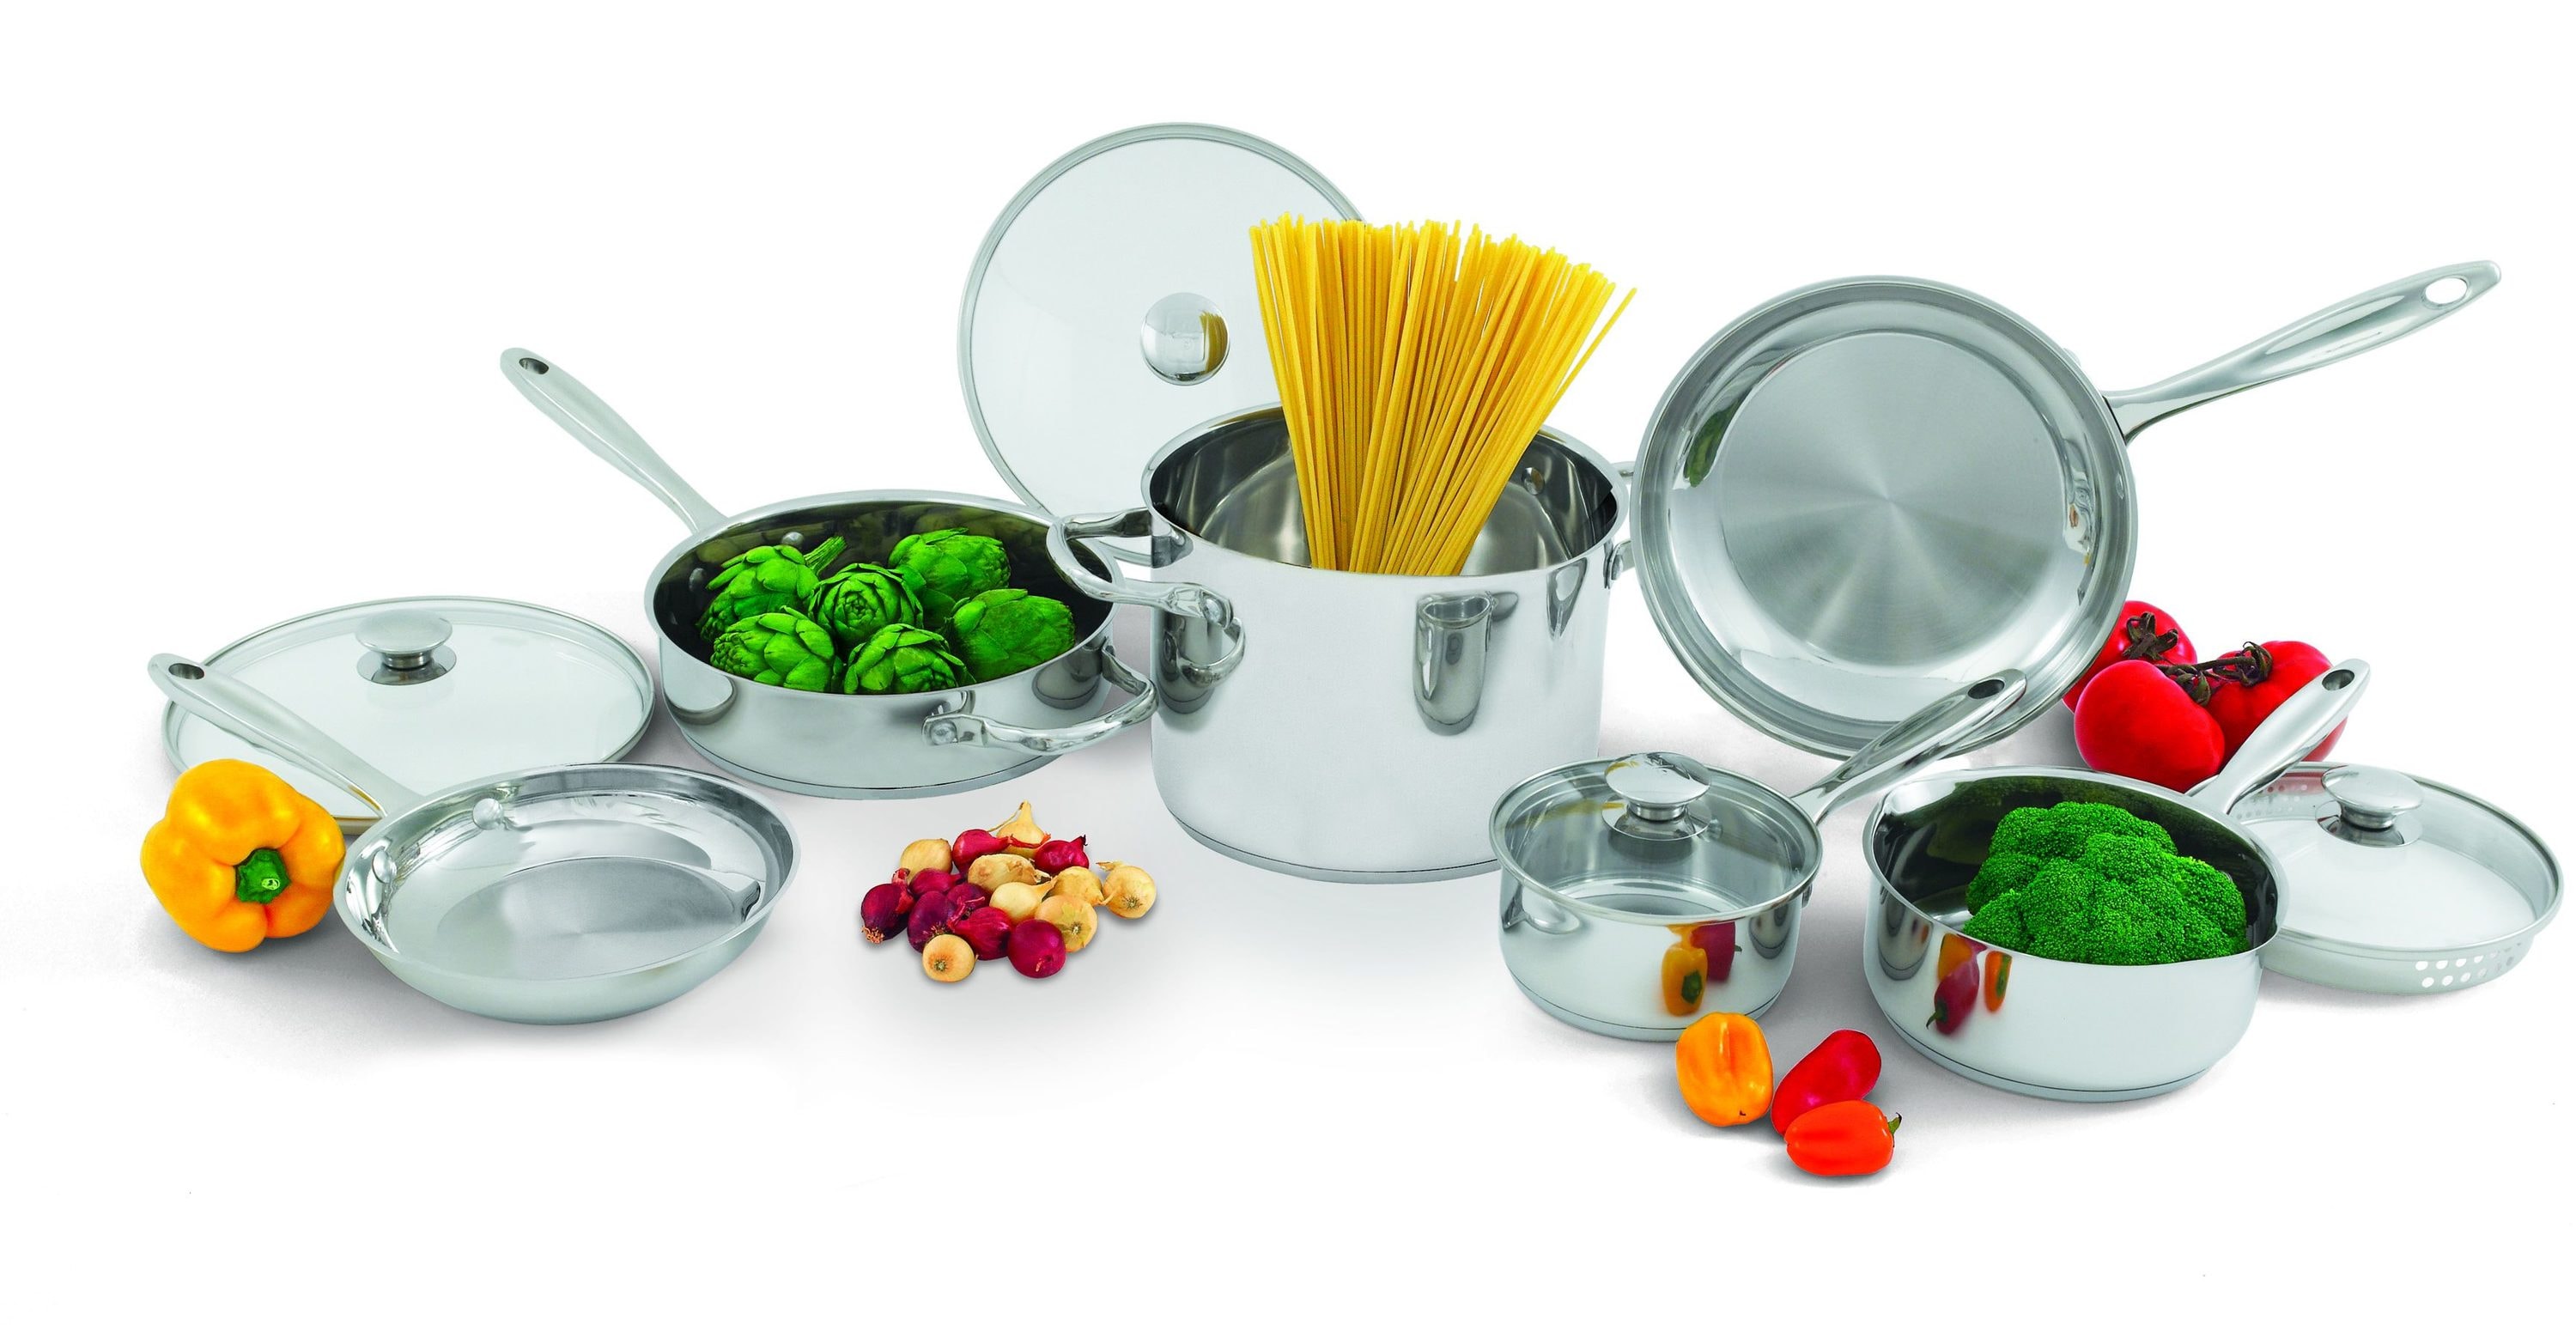 AS NEW Wolfgang Puck Stainless Steel Cookware Set - household